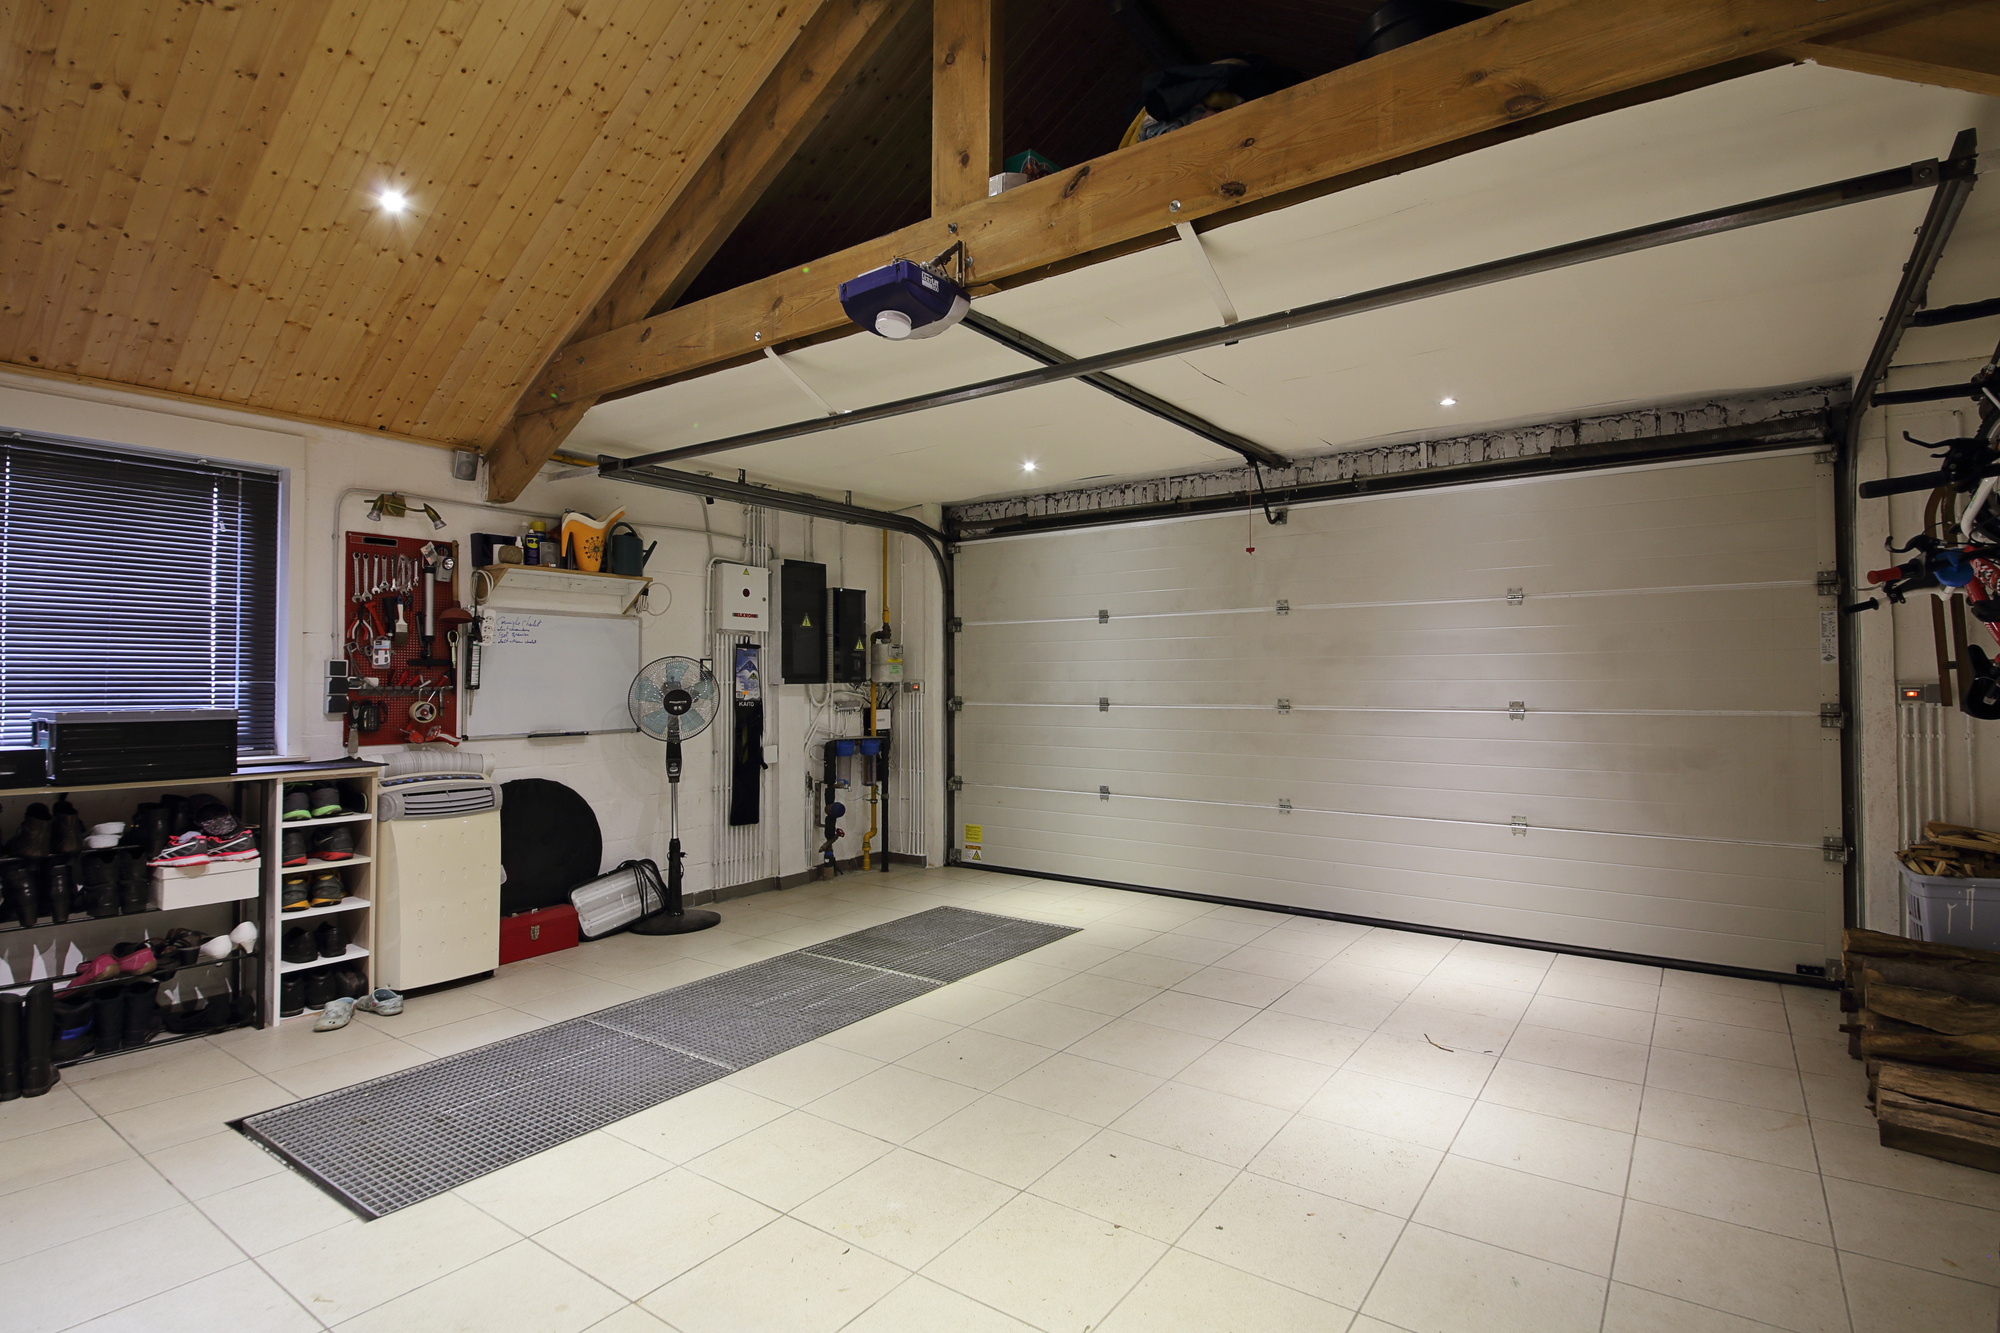 Do you want to turn your garage into the ultimate hangout spot or workshop? This is everything you need to consider when planning a garage makeover.